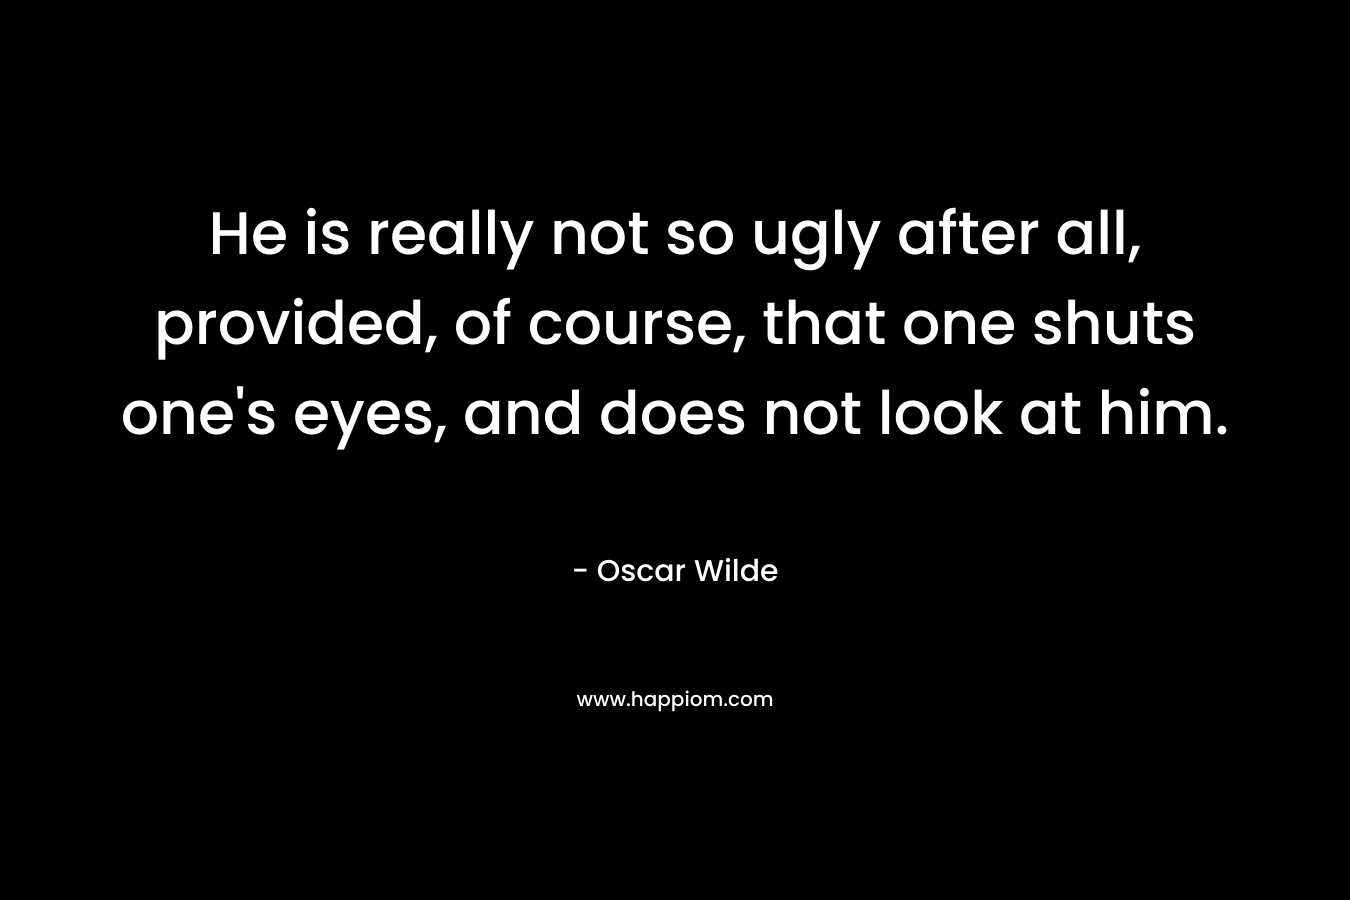 He is really not so ugly after all, provided, of course, that one shuts one's eyes, and does not look at him.